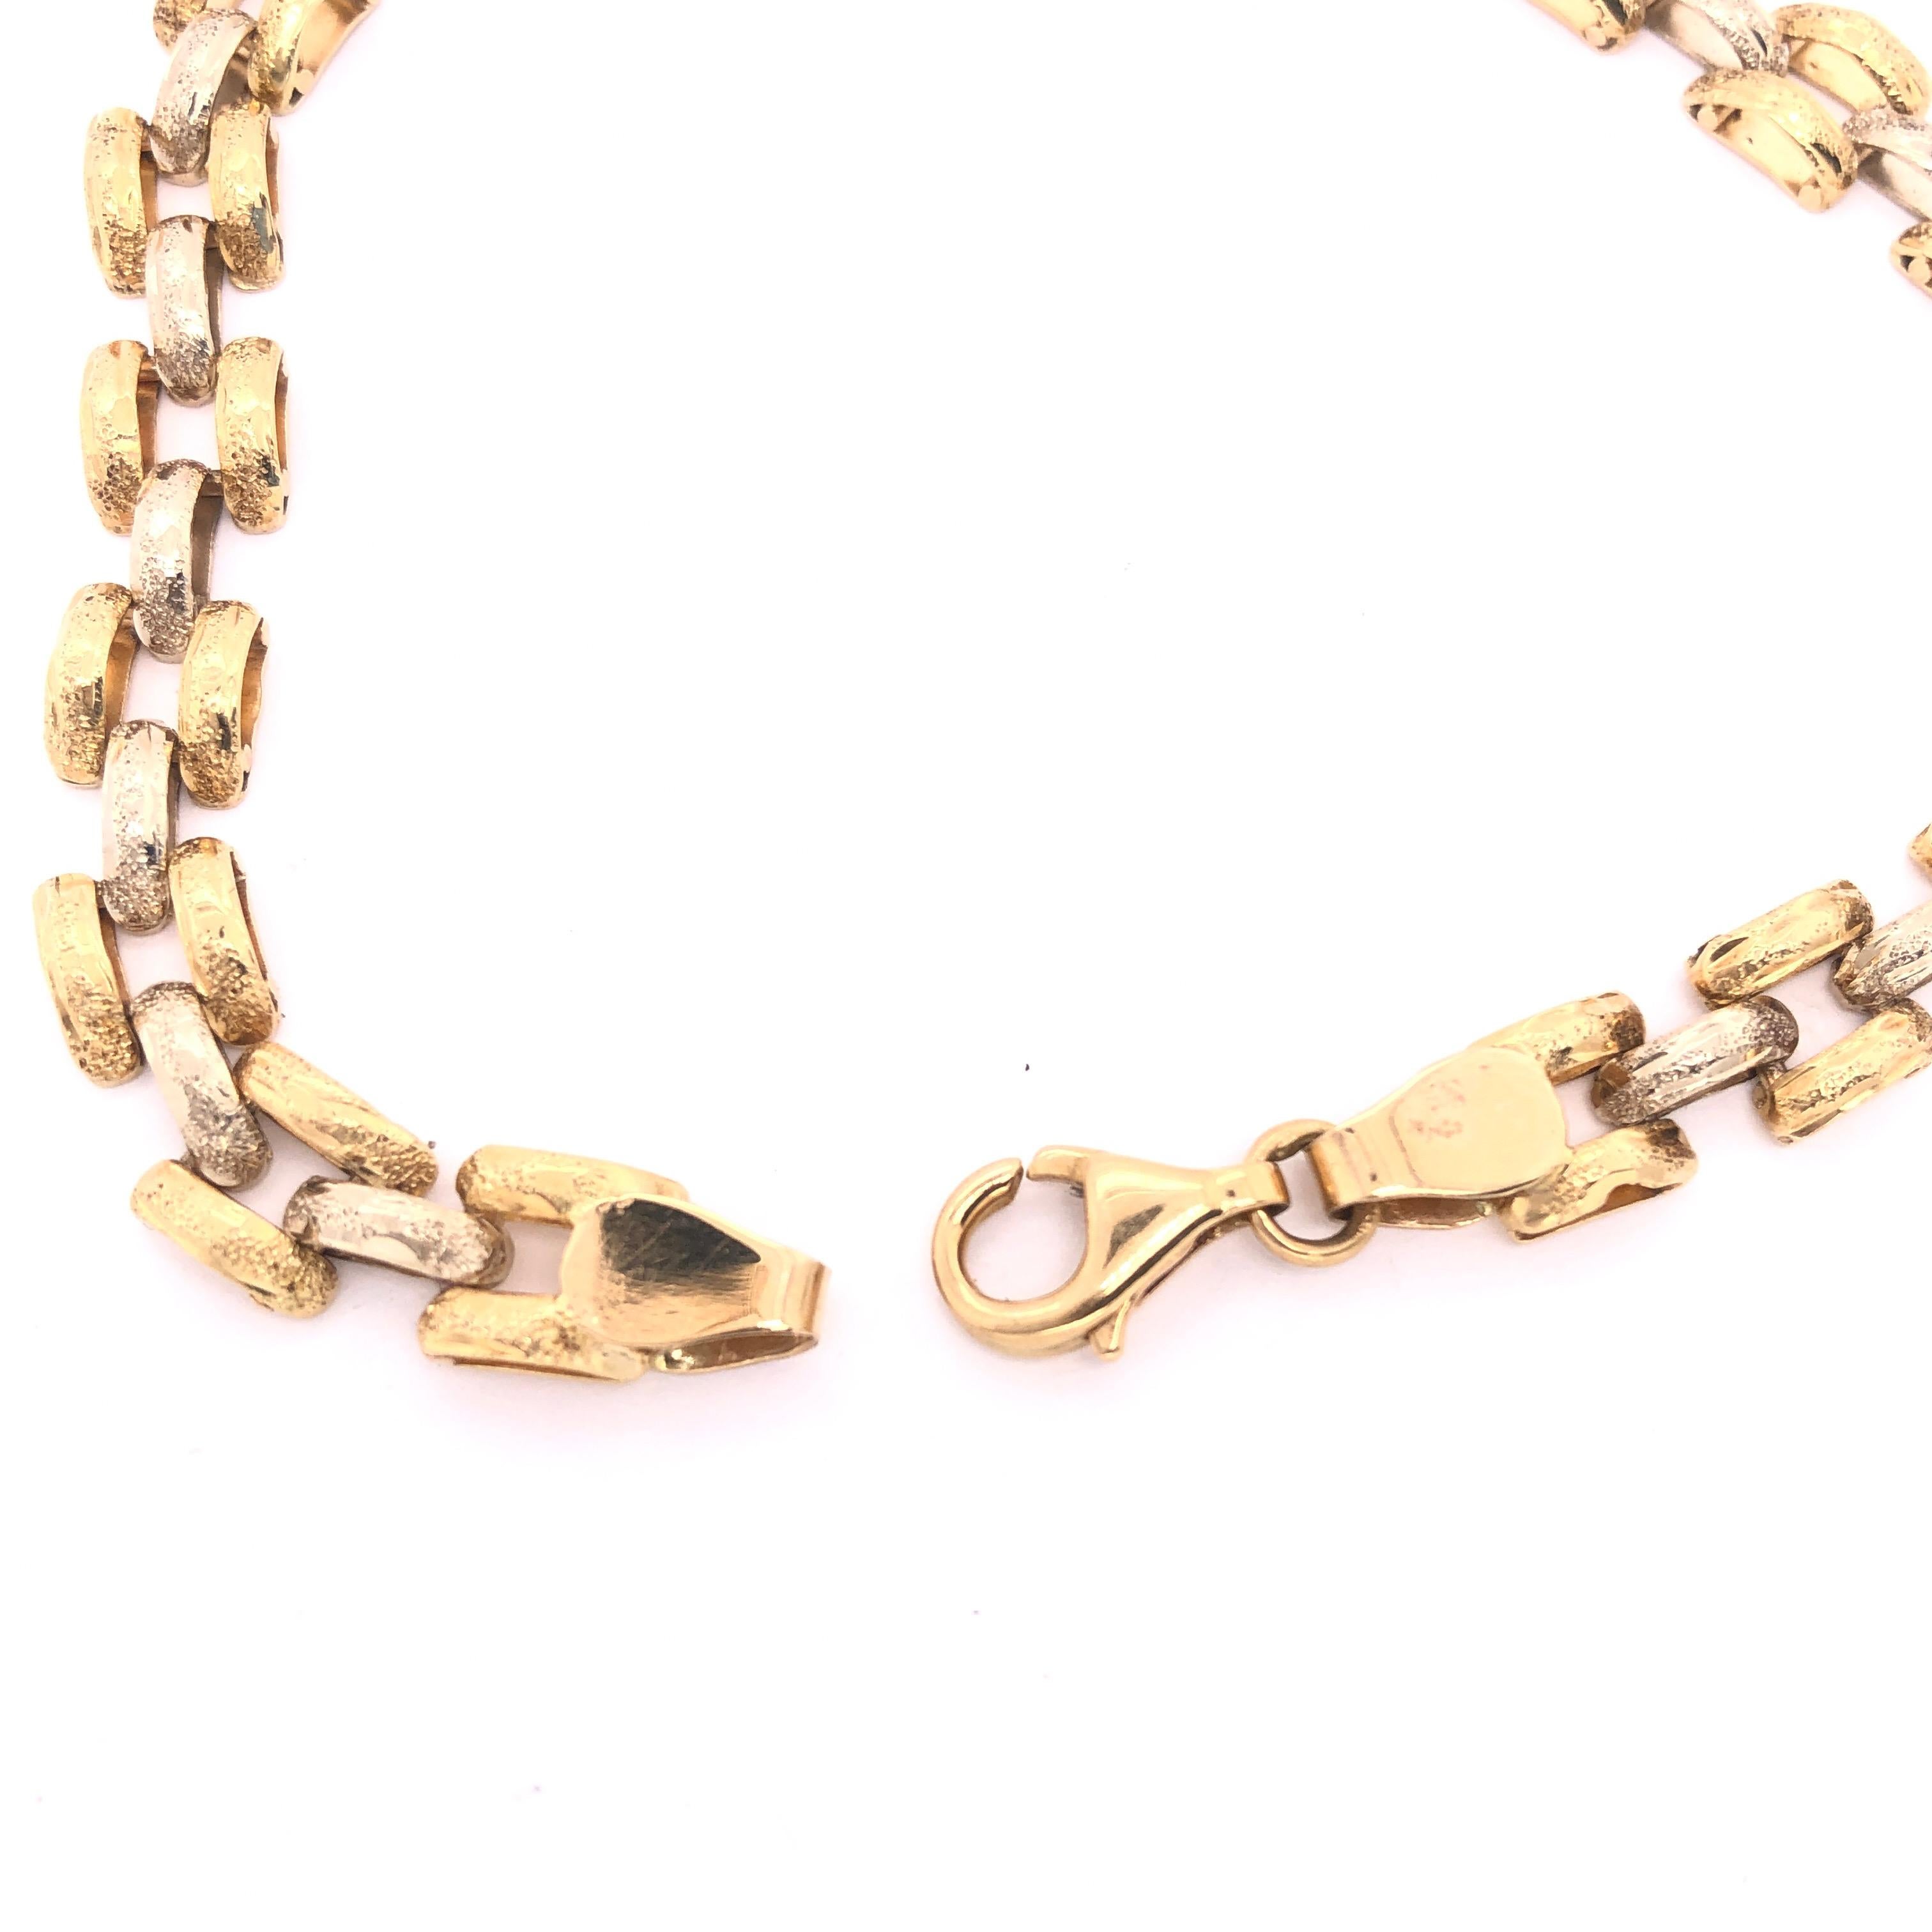 18 Karat Two Tone Yellow And White Gold Fancy Link 8.5 Inch Bracelet
12 grams total weight.
7 mm wide.